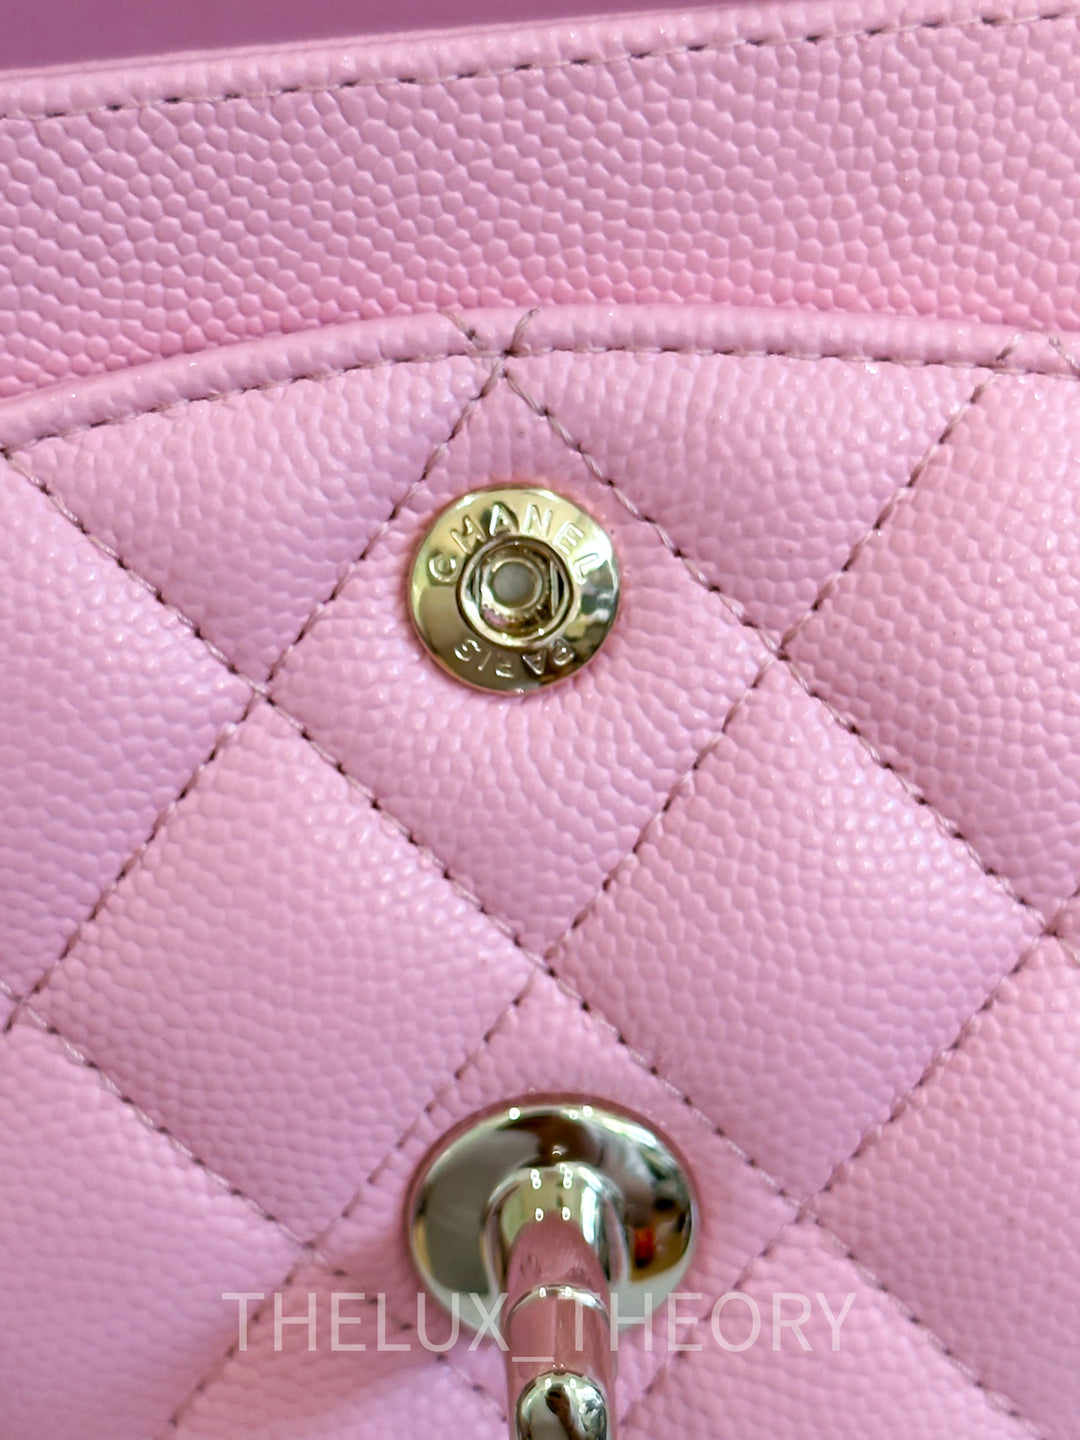 22C PINK SMALL CLASSIC DOUBLE FLAP CAVIAR LIGHT GOLD HARDWARE